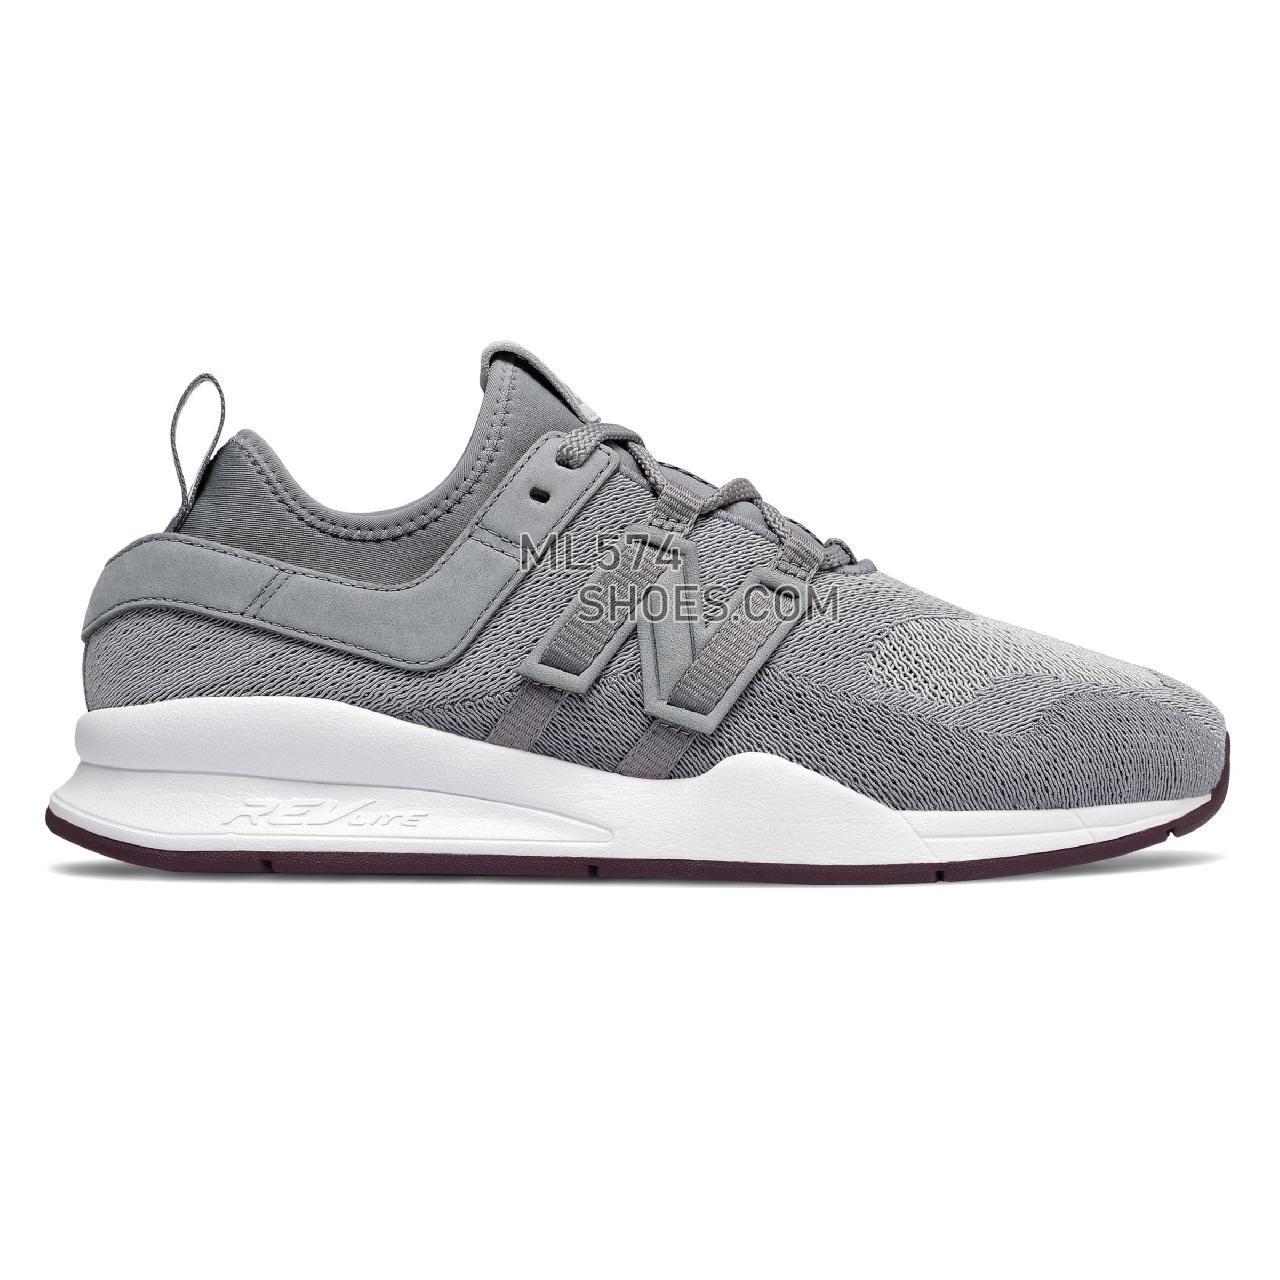 New Balance 247 Trace Fiber - Men's Sport Style Sneakers - Gunmetal with Dark Currant - MS247TGS